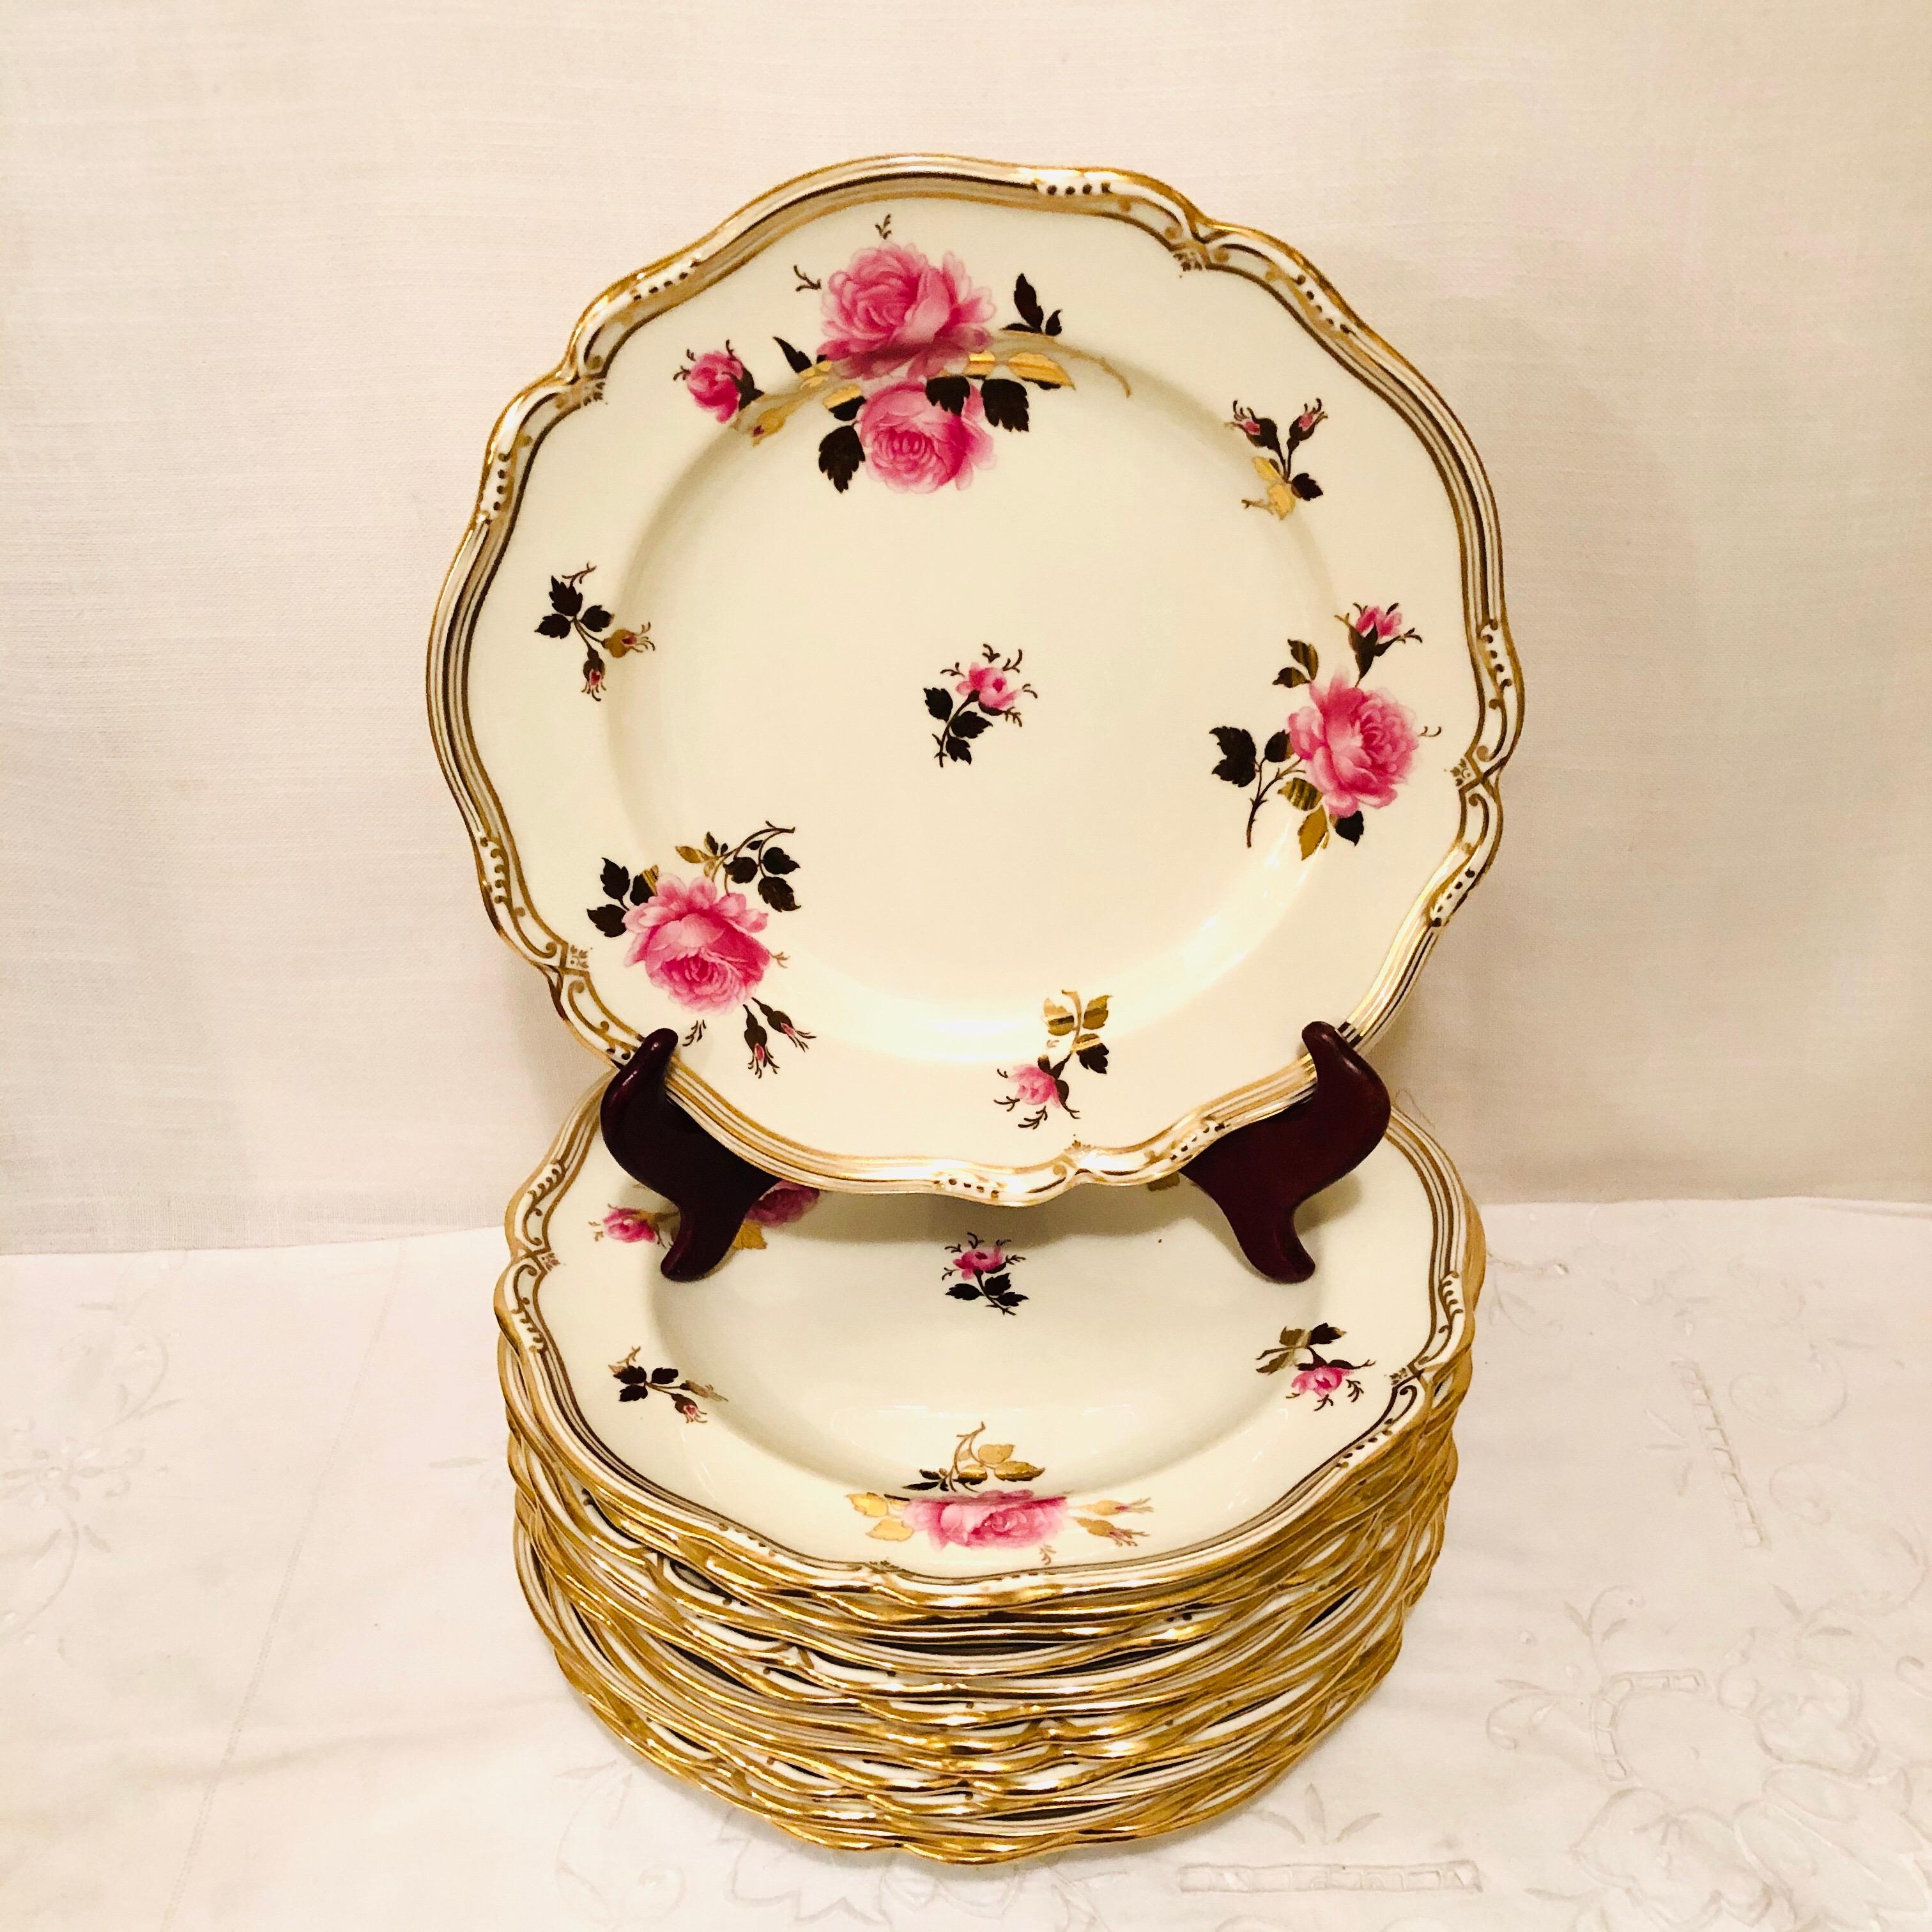 Spode Made for Tiffany 68 Piece Dinner Service Decorated with Large Pink Roses 2